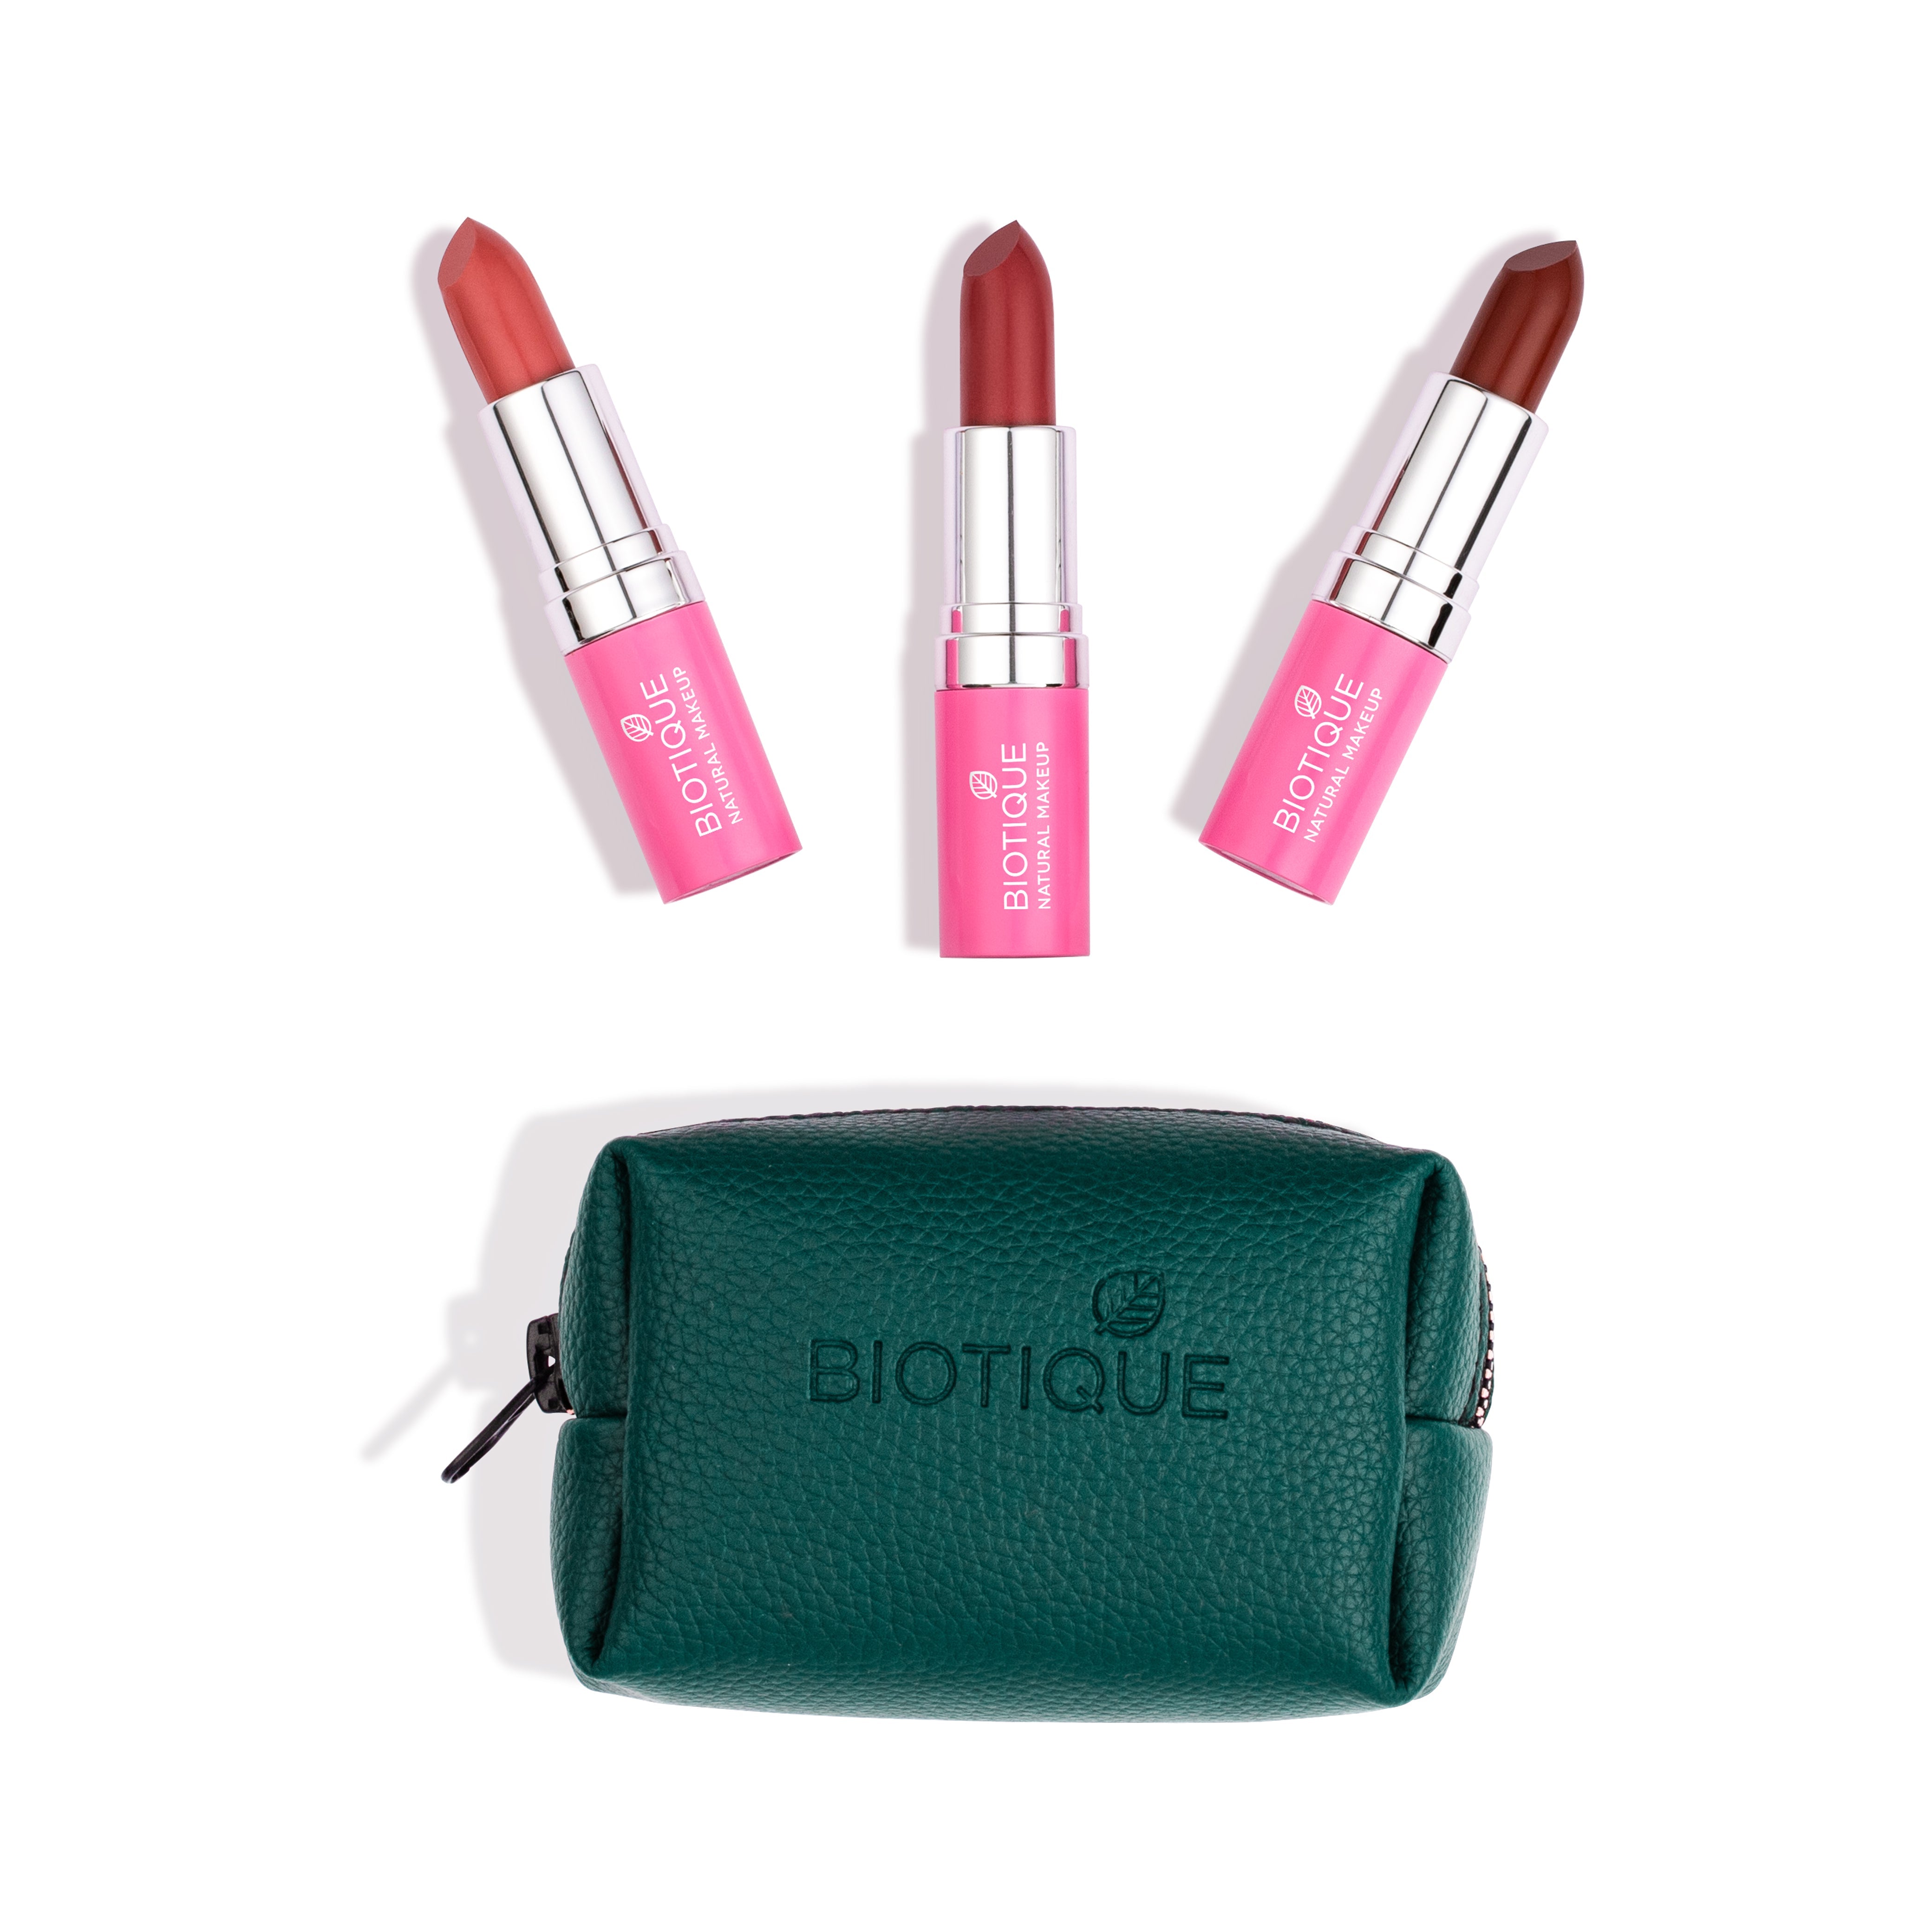 Lipstick Pack of 3: Nude Edition with Lipstick Case